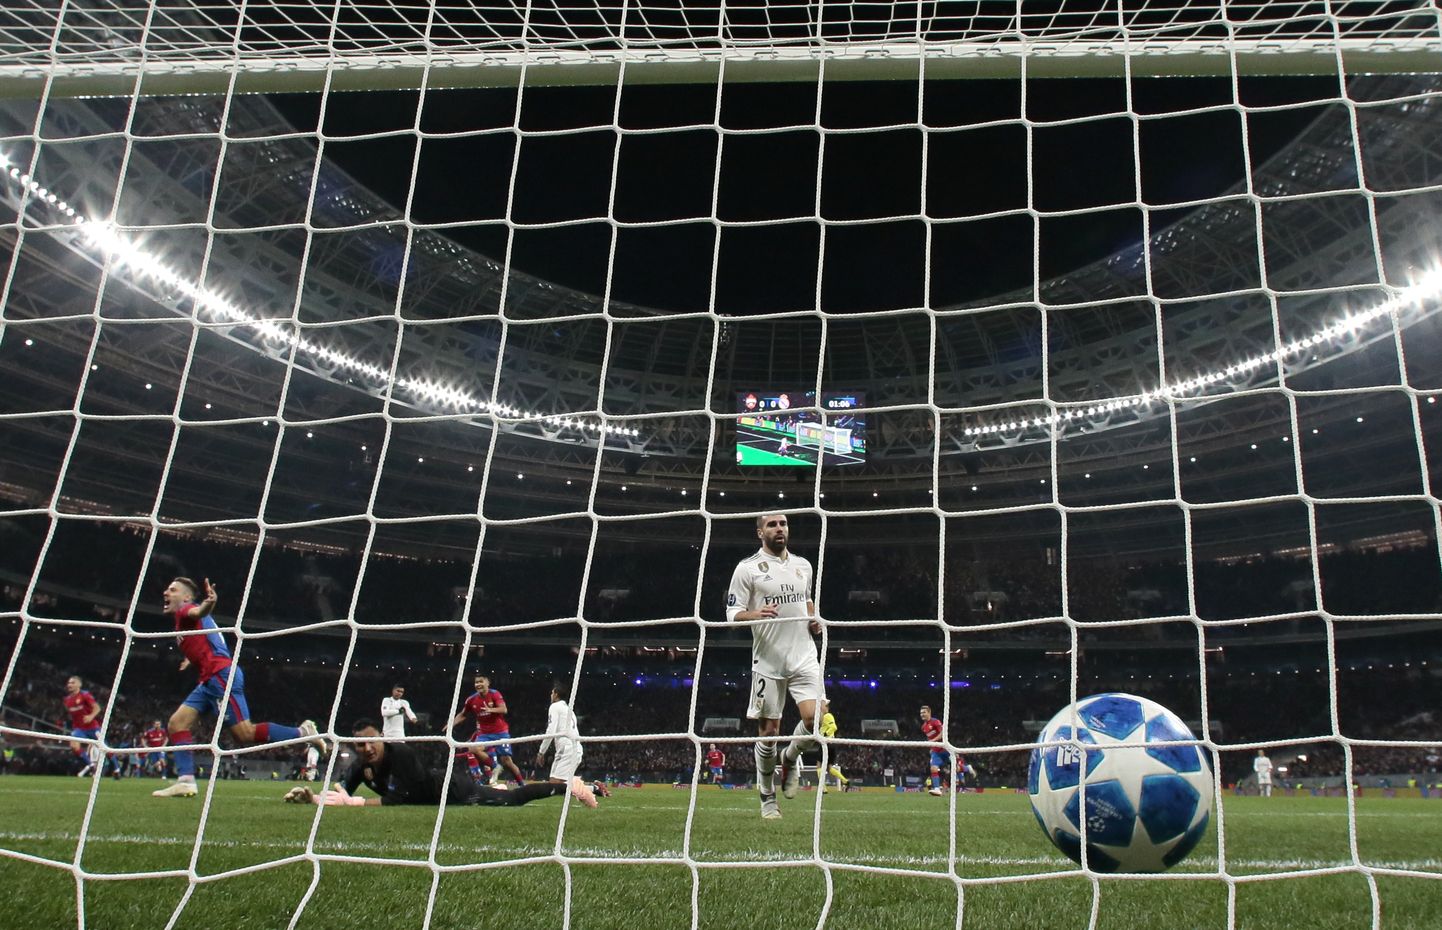 Real goalkeeper Keylor Navas fails to stop a shot by CSKA midfielder Nikola Vlasic during a Group G Champions League soccer match between CSKA Moscow and Real Madrid at the Luzhniki Stadium in Moscow, Russia, Tuesday, Oct. 2, 2018. (AP Photo/Alexander Zemlianichenko)